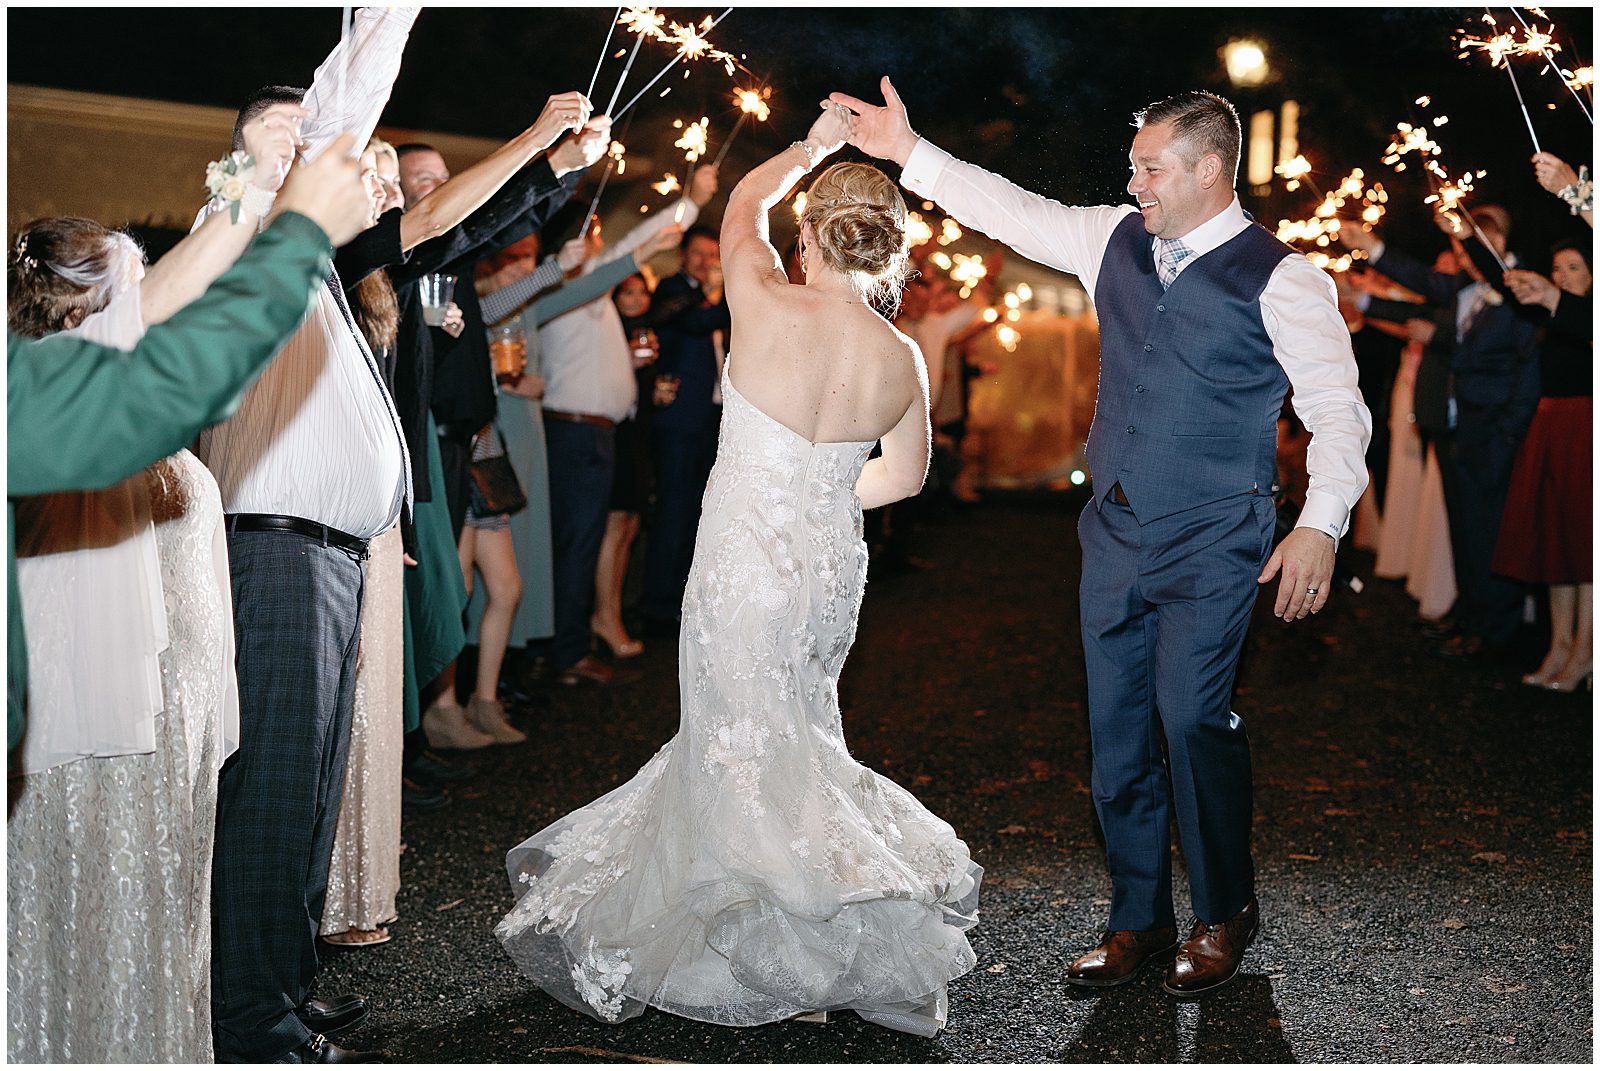 Fall Hawkesdene Wedding Sparkler Exit Bride and Groom Twirling Photo